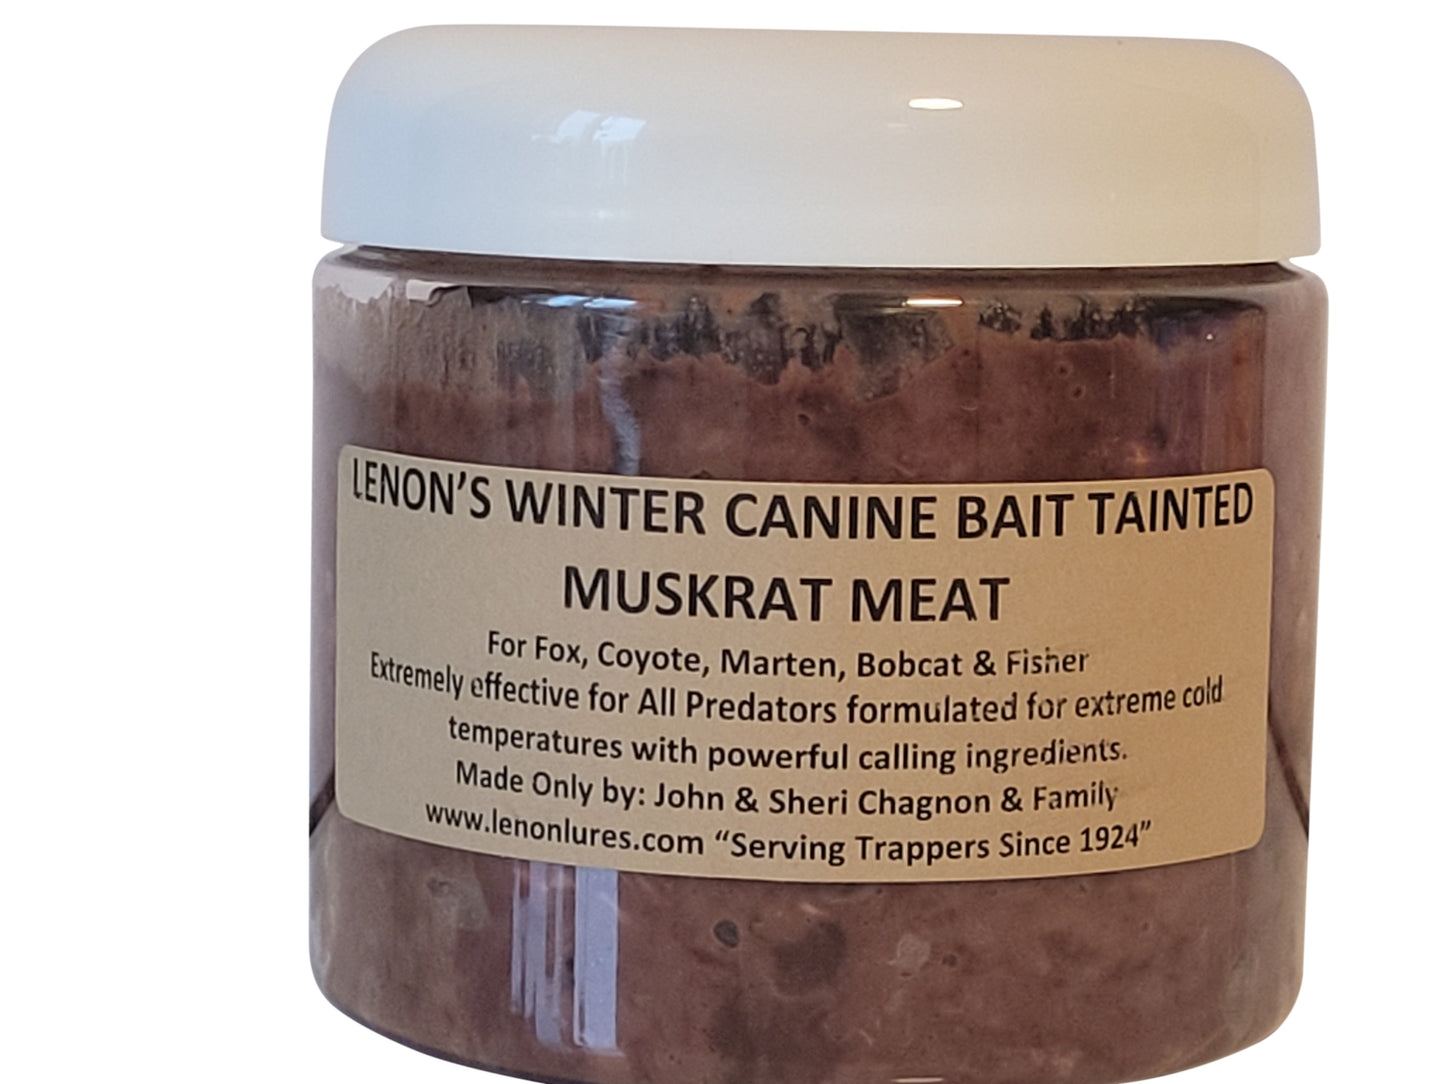 Lenon's Winter Canine Bait Tainted Muskrat Meat